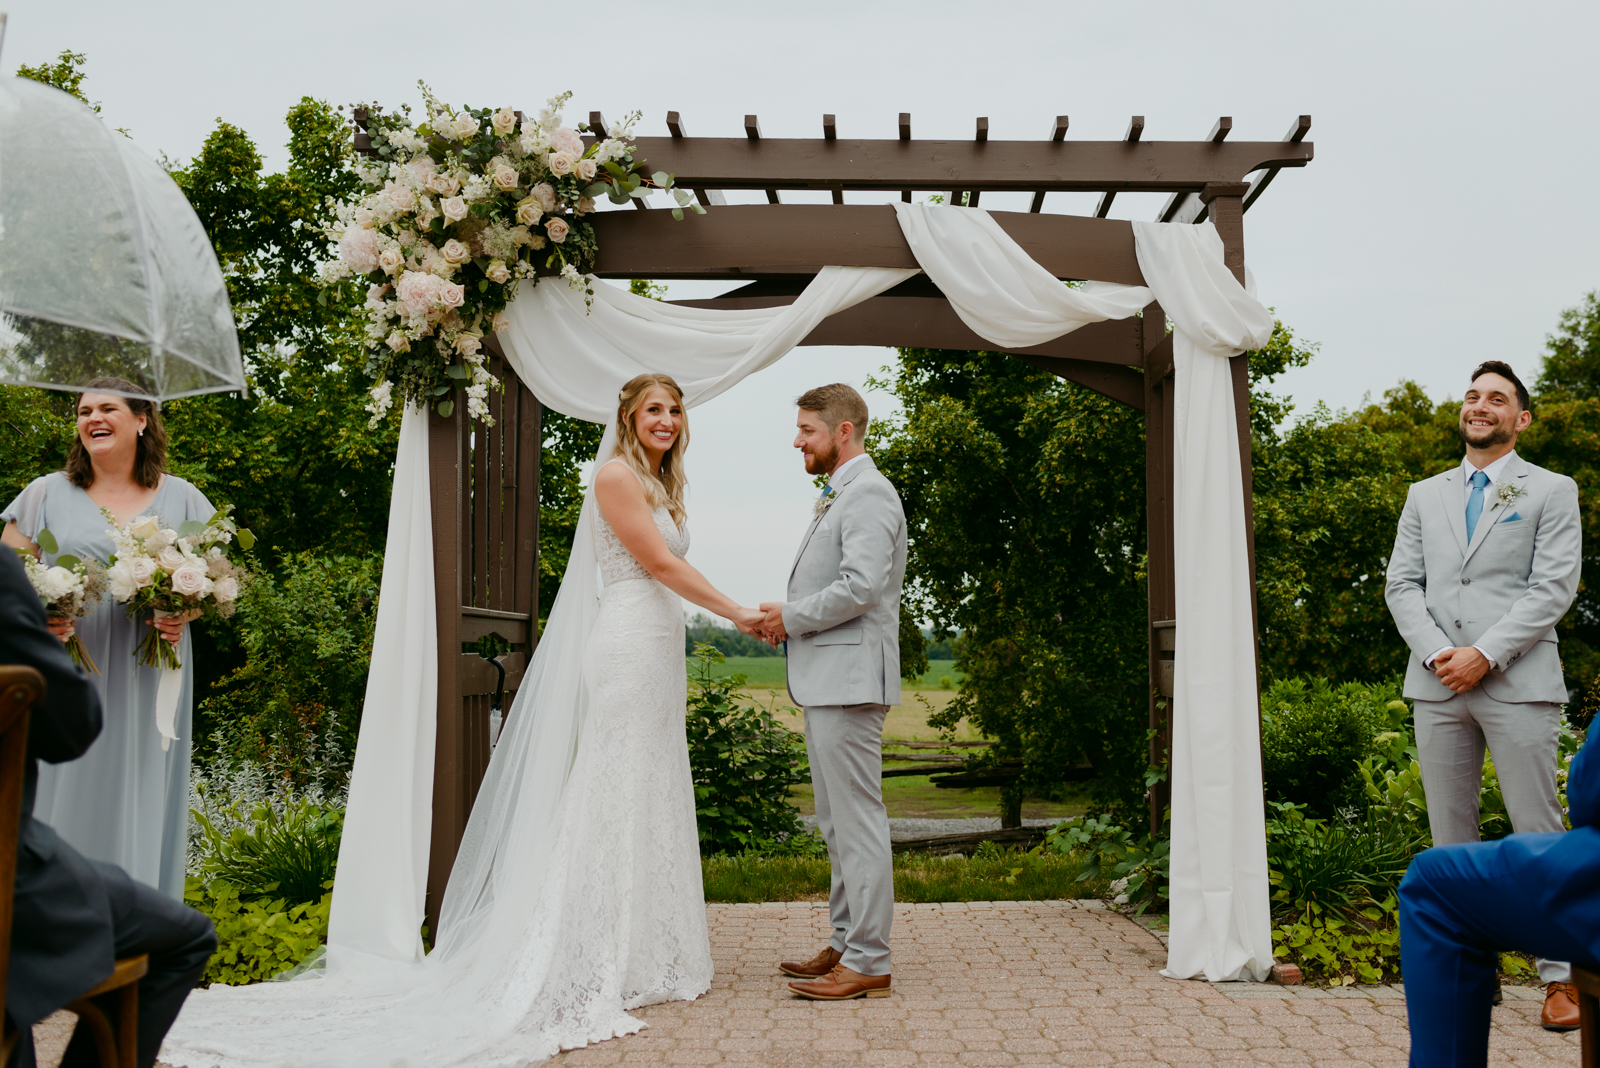 bride and groom under pergola wedding arch during outdoor wedding ceremony at Strathmere